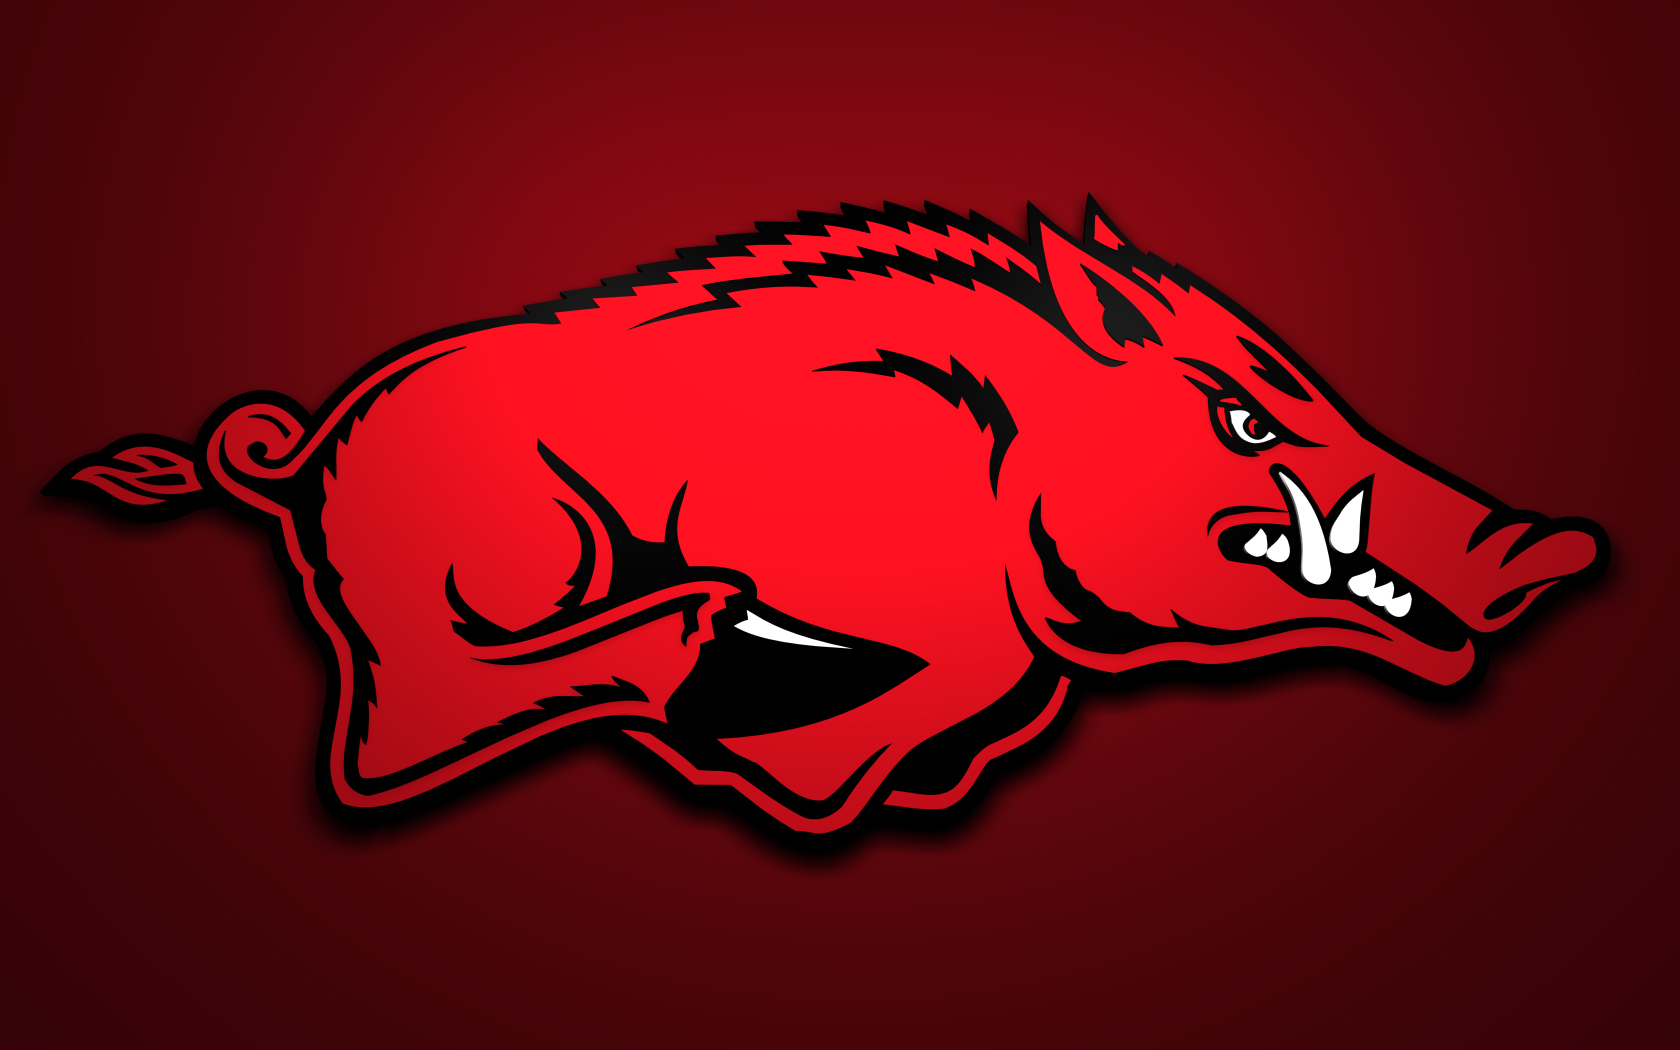 Get a Set of 12 Officially NCAA Licensed Arkansas Razorbacks iPhone  Wallpapers sized precisely for  Arkansas razorbacks football Team  colors Arkansas razorbacks